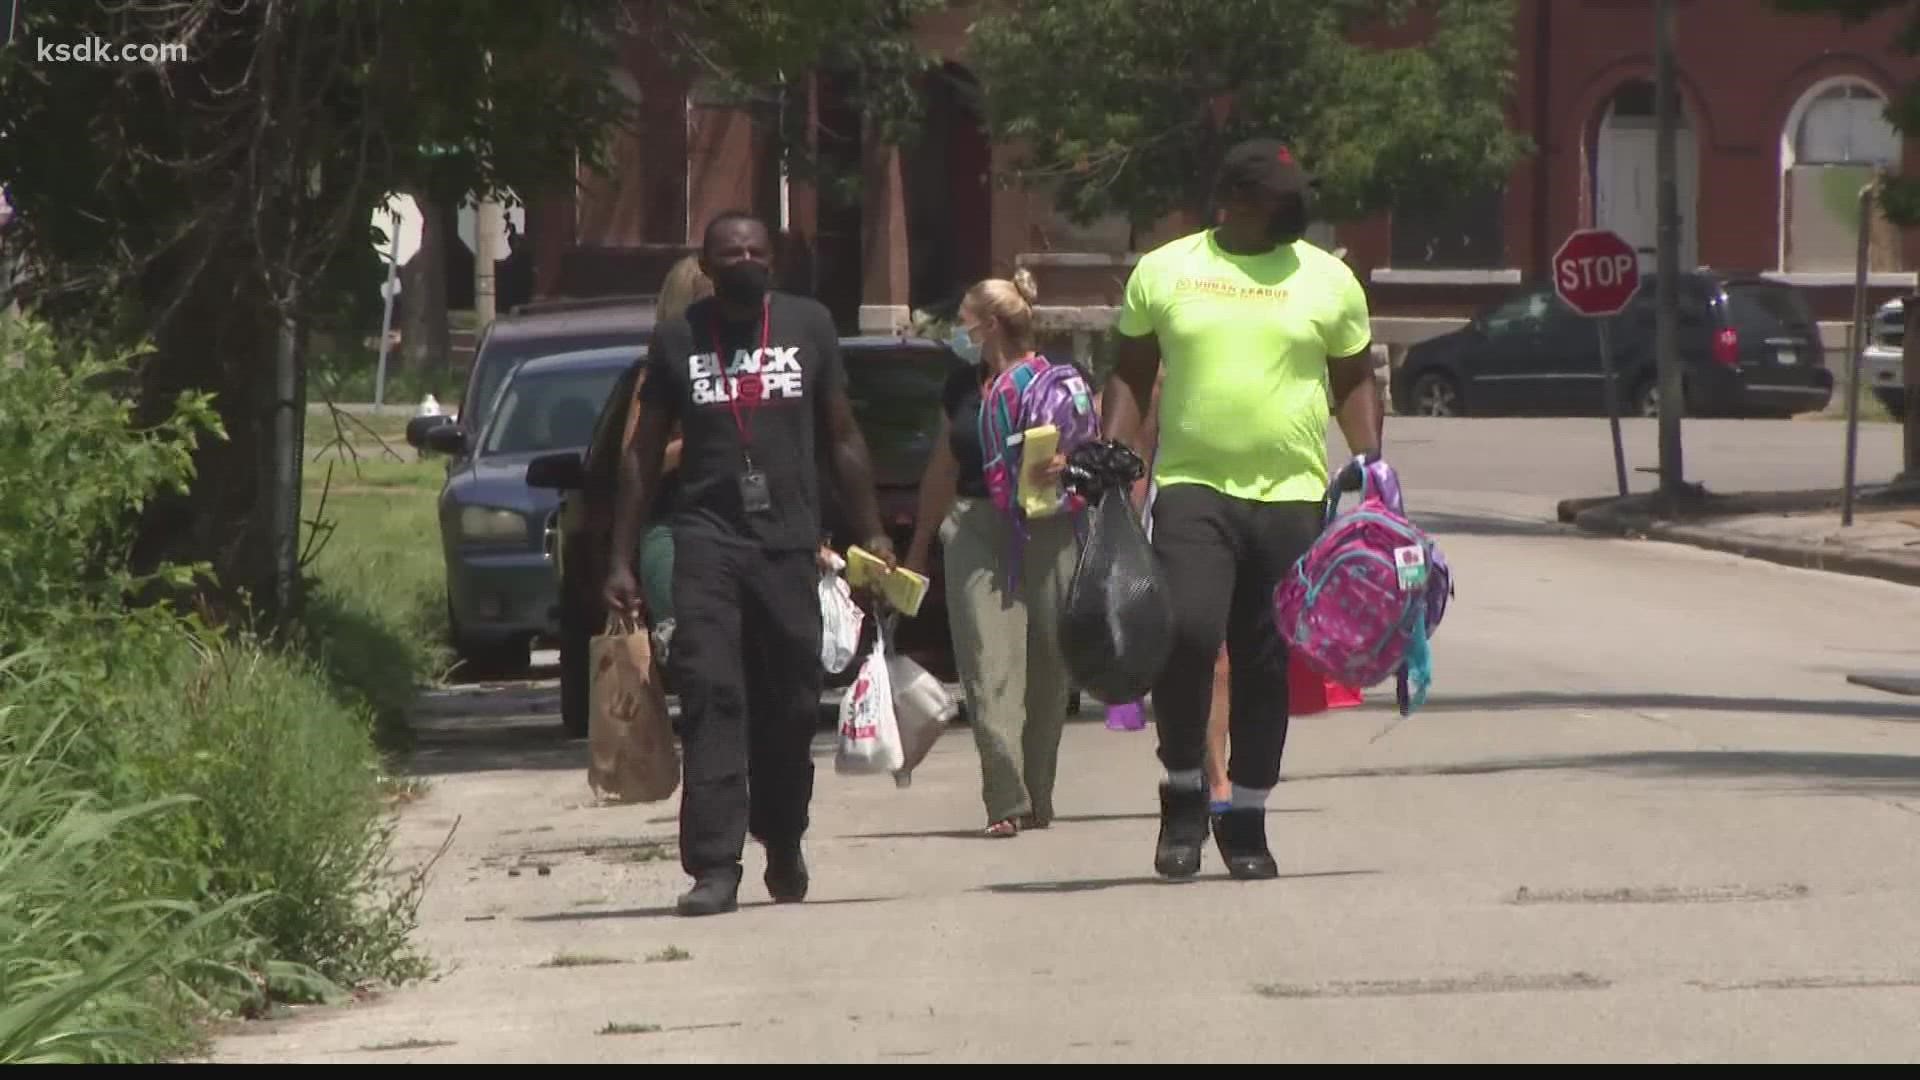 The organization teamed up with The Urban League to go door-to-door to spread love and information.